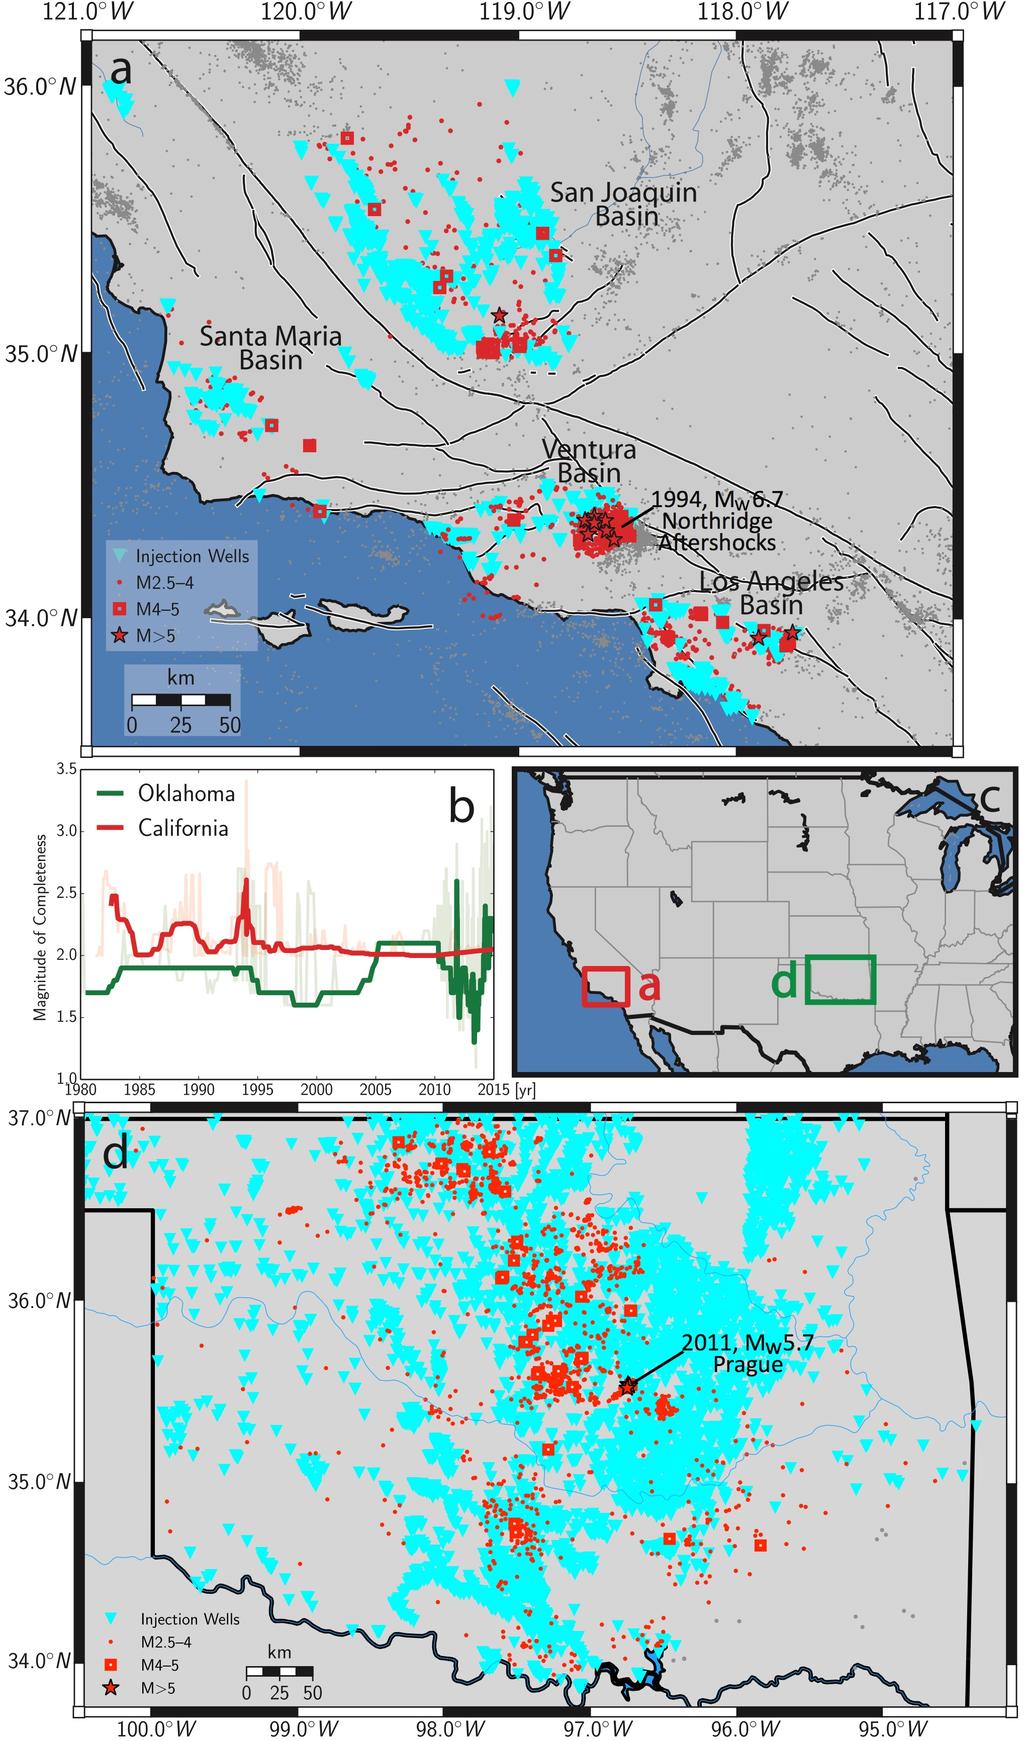 328 329 330 331 332 333 Figure 1: Seismicity (red dots, squares, star; see legend for magnitudes) and injection well locations (blue triangles) in CA (a) and OK (d).